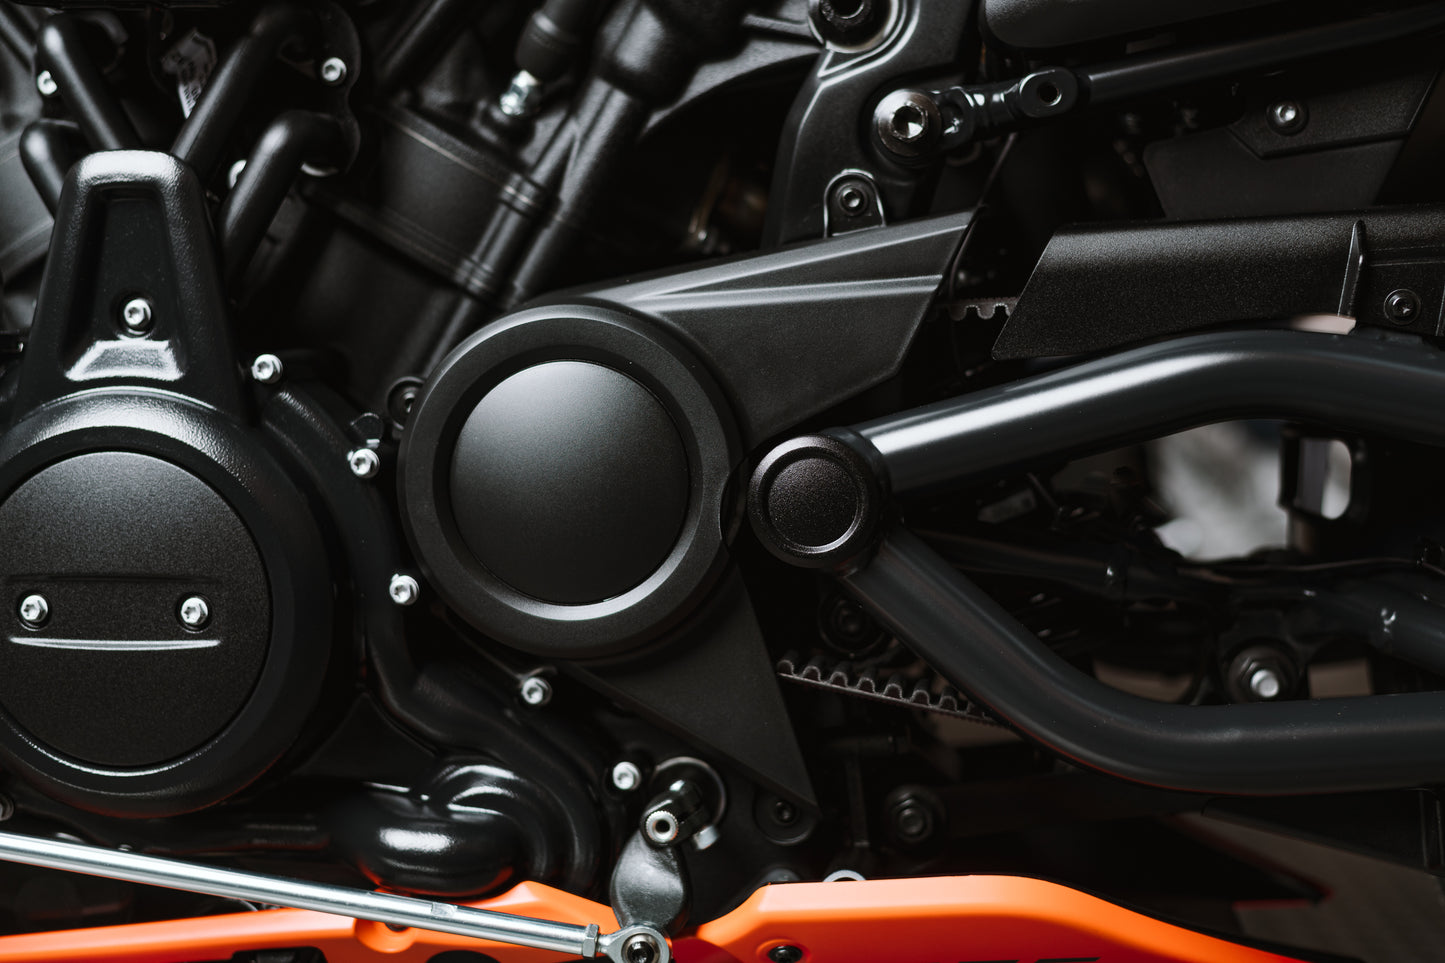 2021-Later Sportster S Swingarm Axle Cover Set